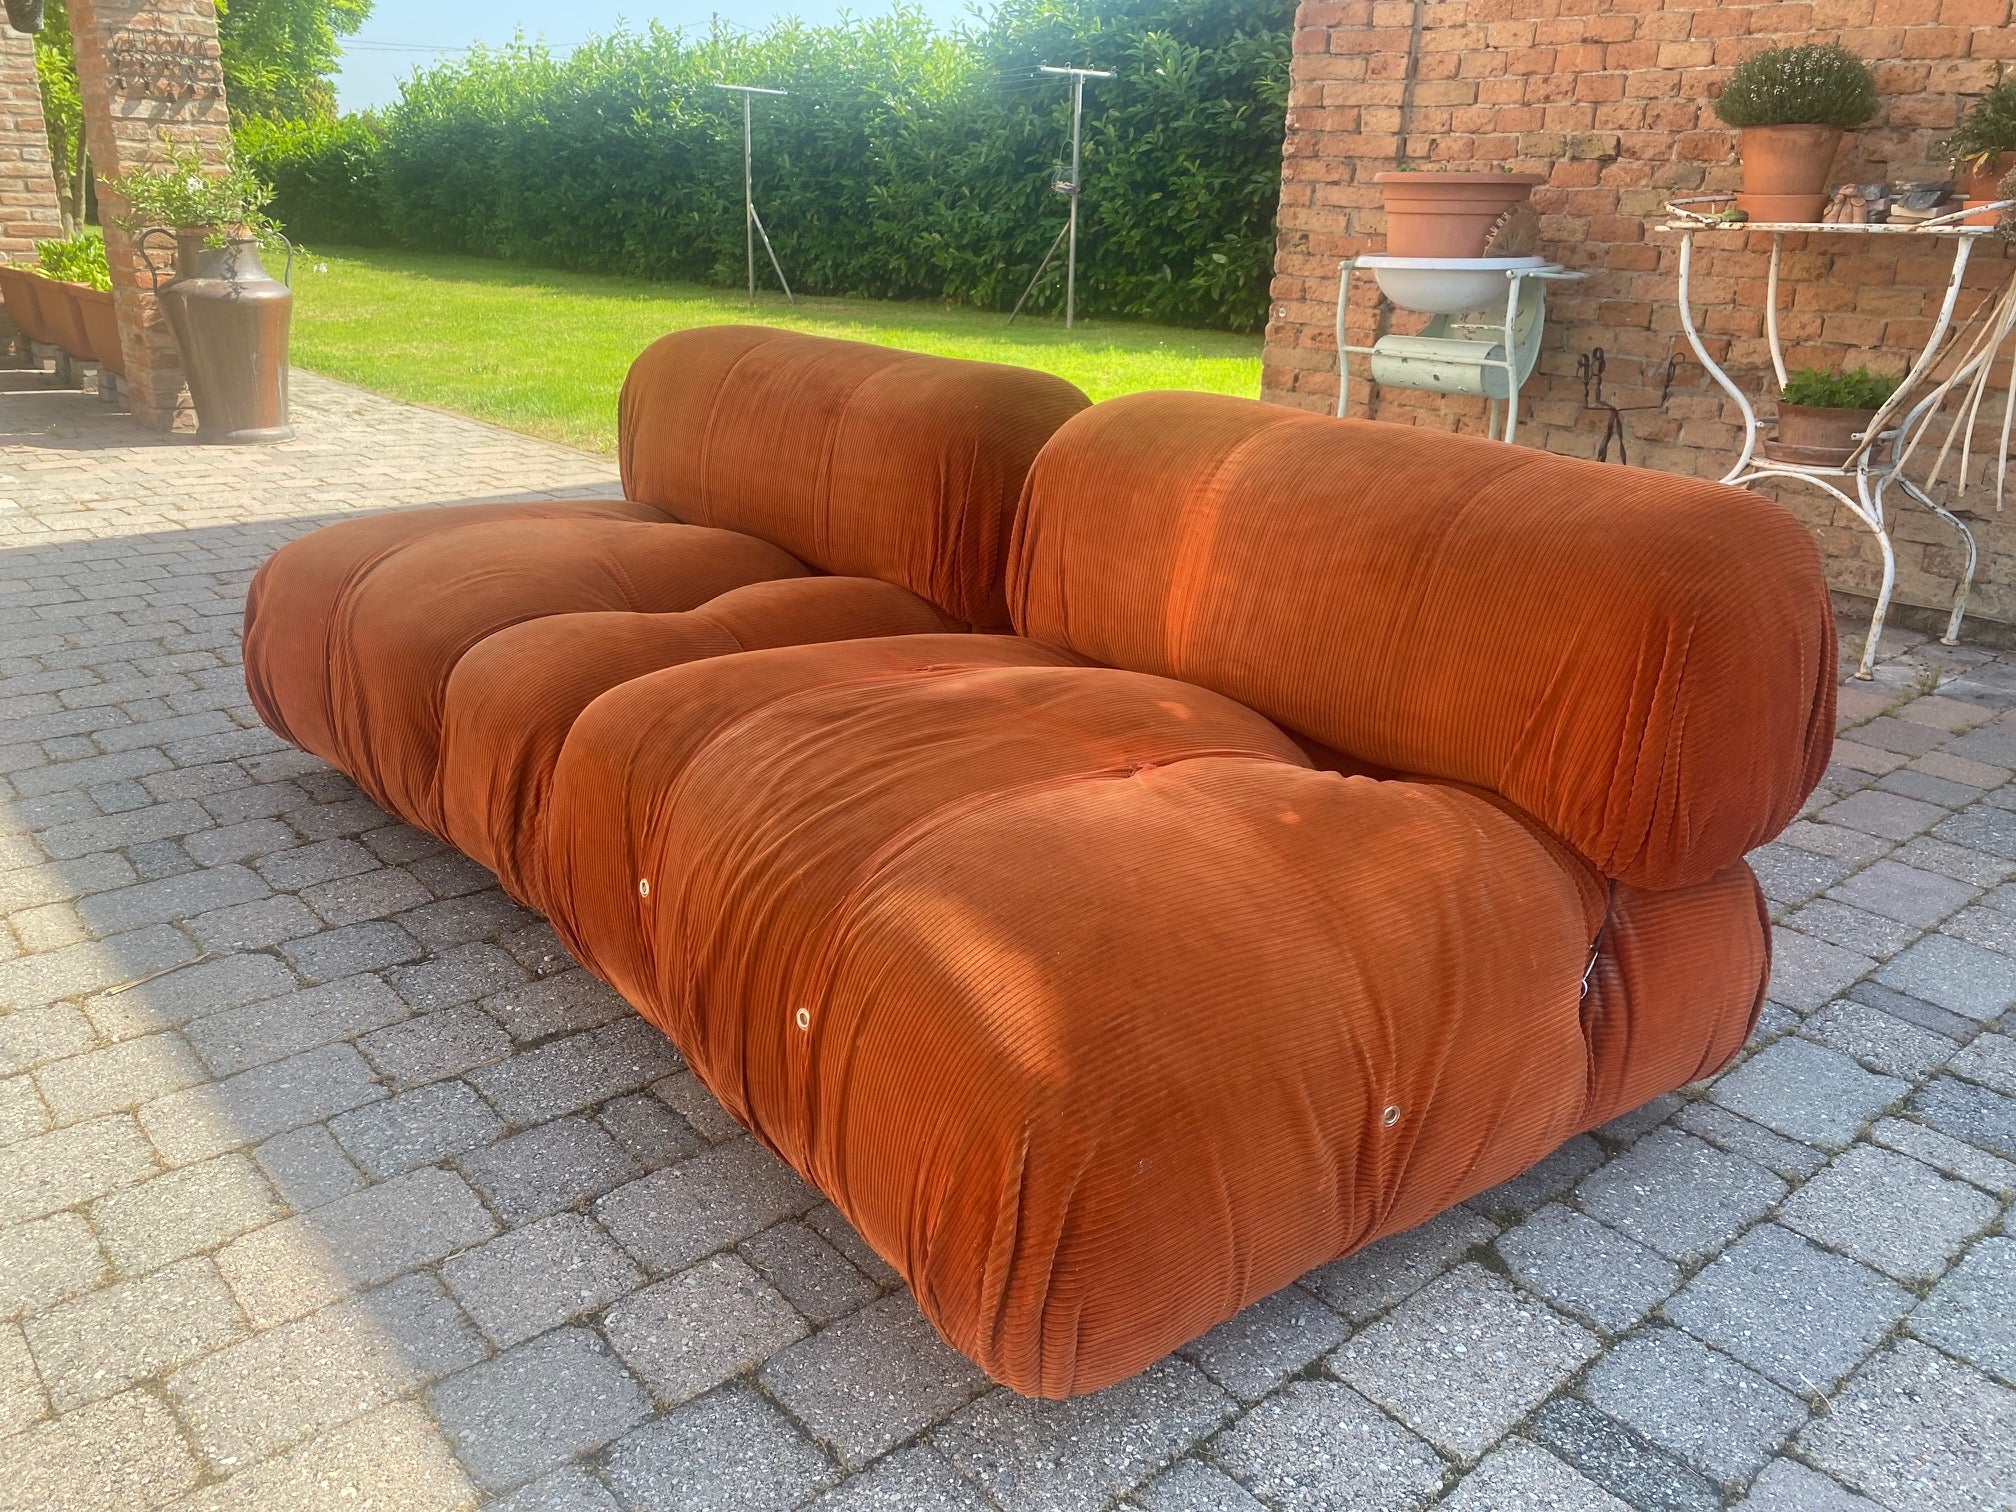 Postmodern Camaleonda seating elements by Mario Bellini for B&B Italia, 1970s.

set of two C&B Camaleonda sofas in the original iconic orange fabric.The set is in fair vintage condition, with signs of wear consistent with age and use.

The sofa can